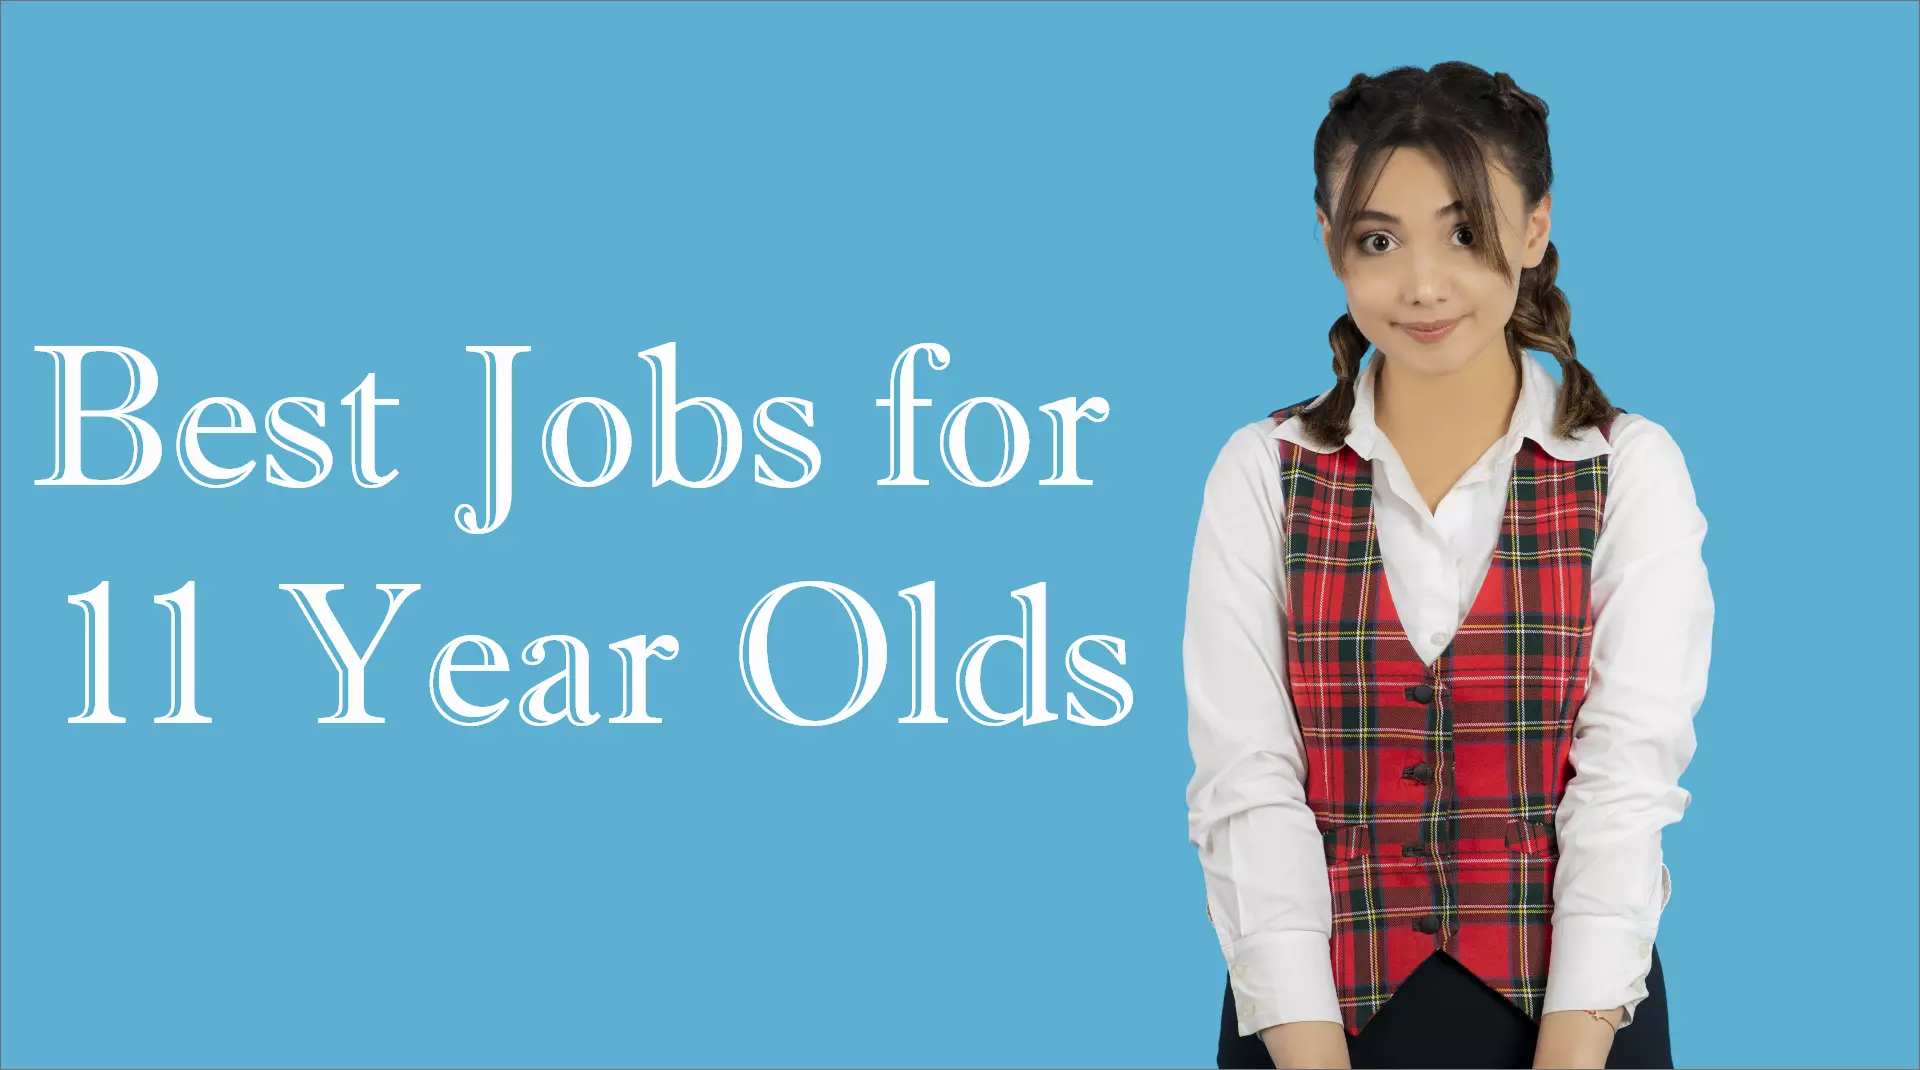 Jobs for 11 Year Olds